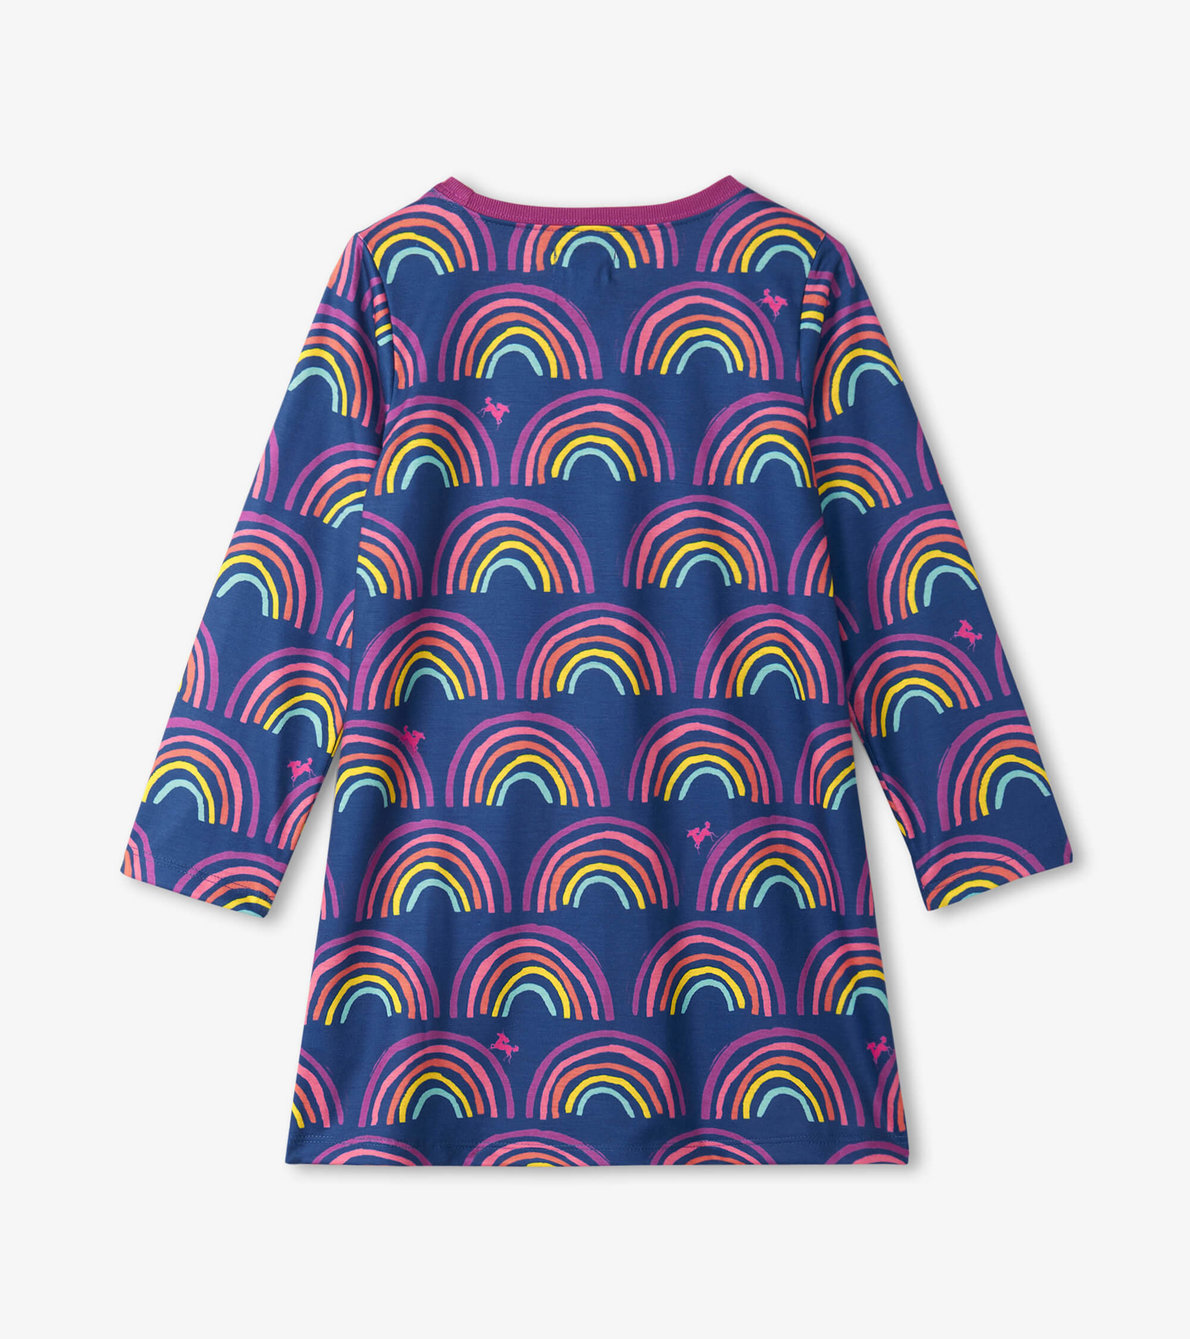 View larger image of Rainbow Dreams Long Sleeve Nightdress